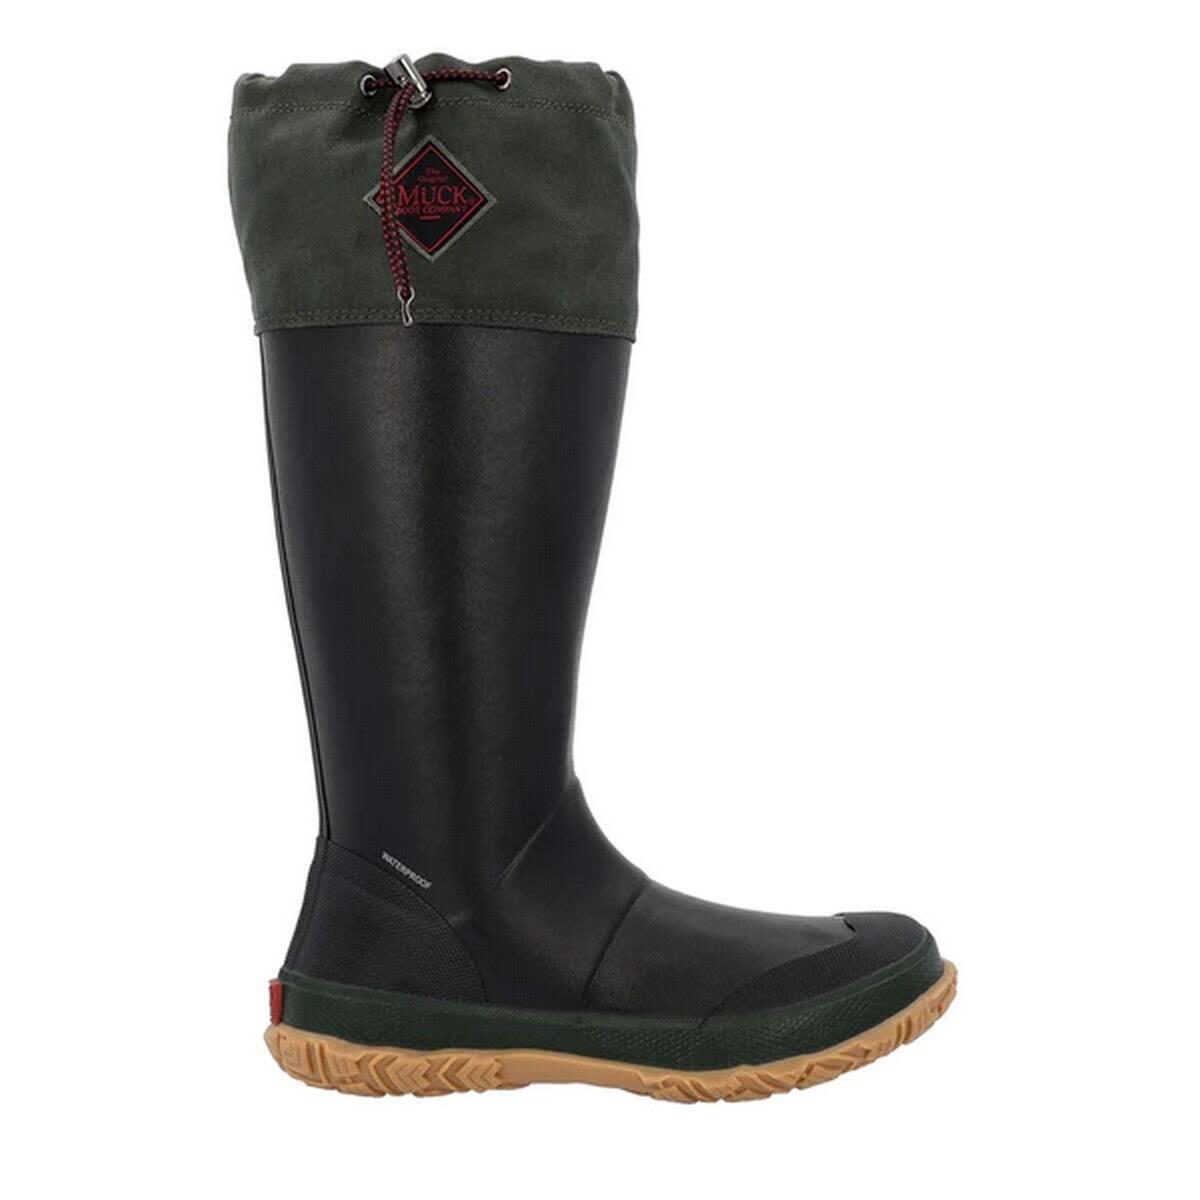 Unisex Adult Forager 15 Wellington Boots (Black/Moss Green) 1/4